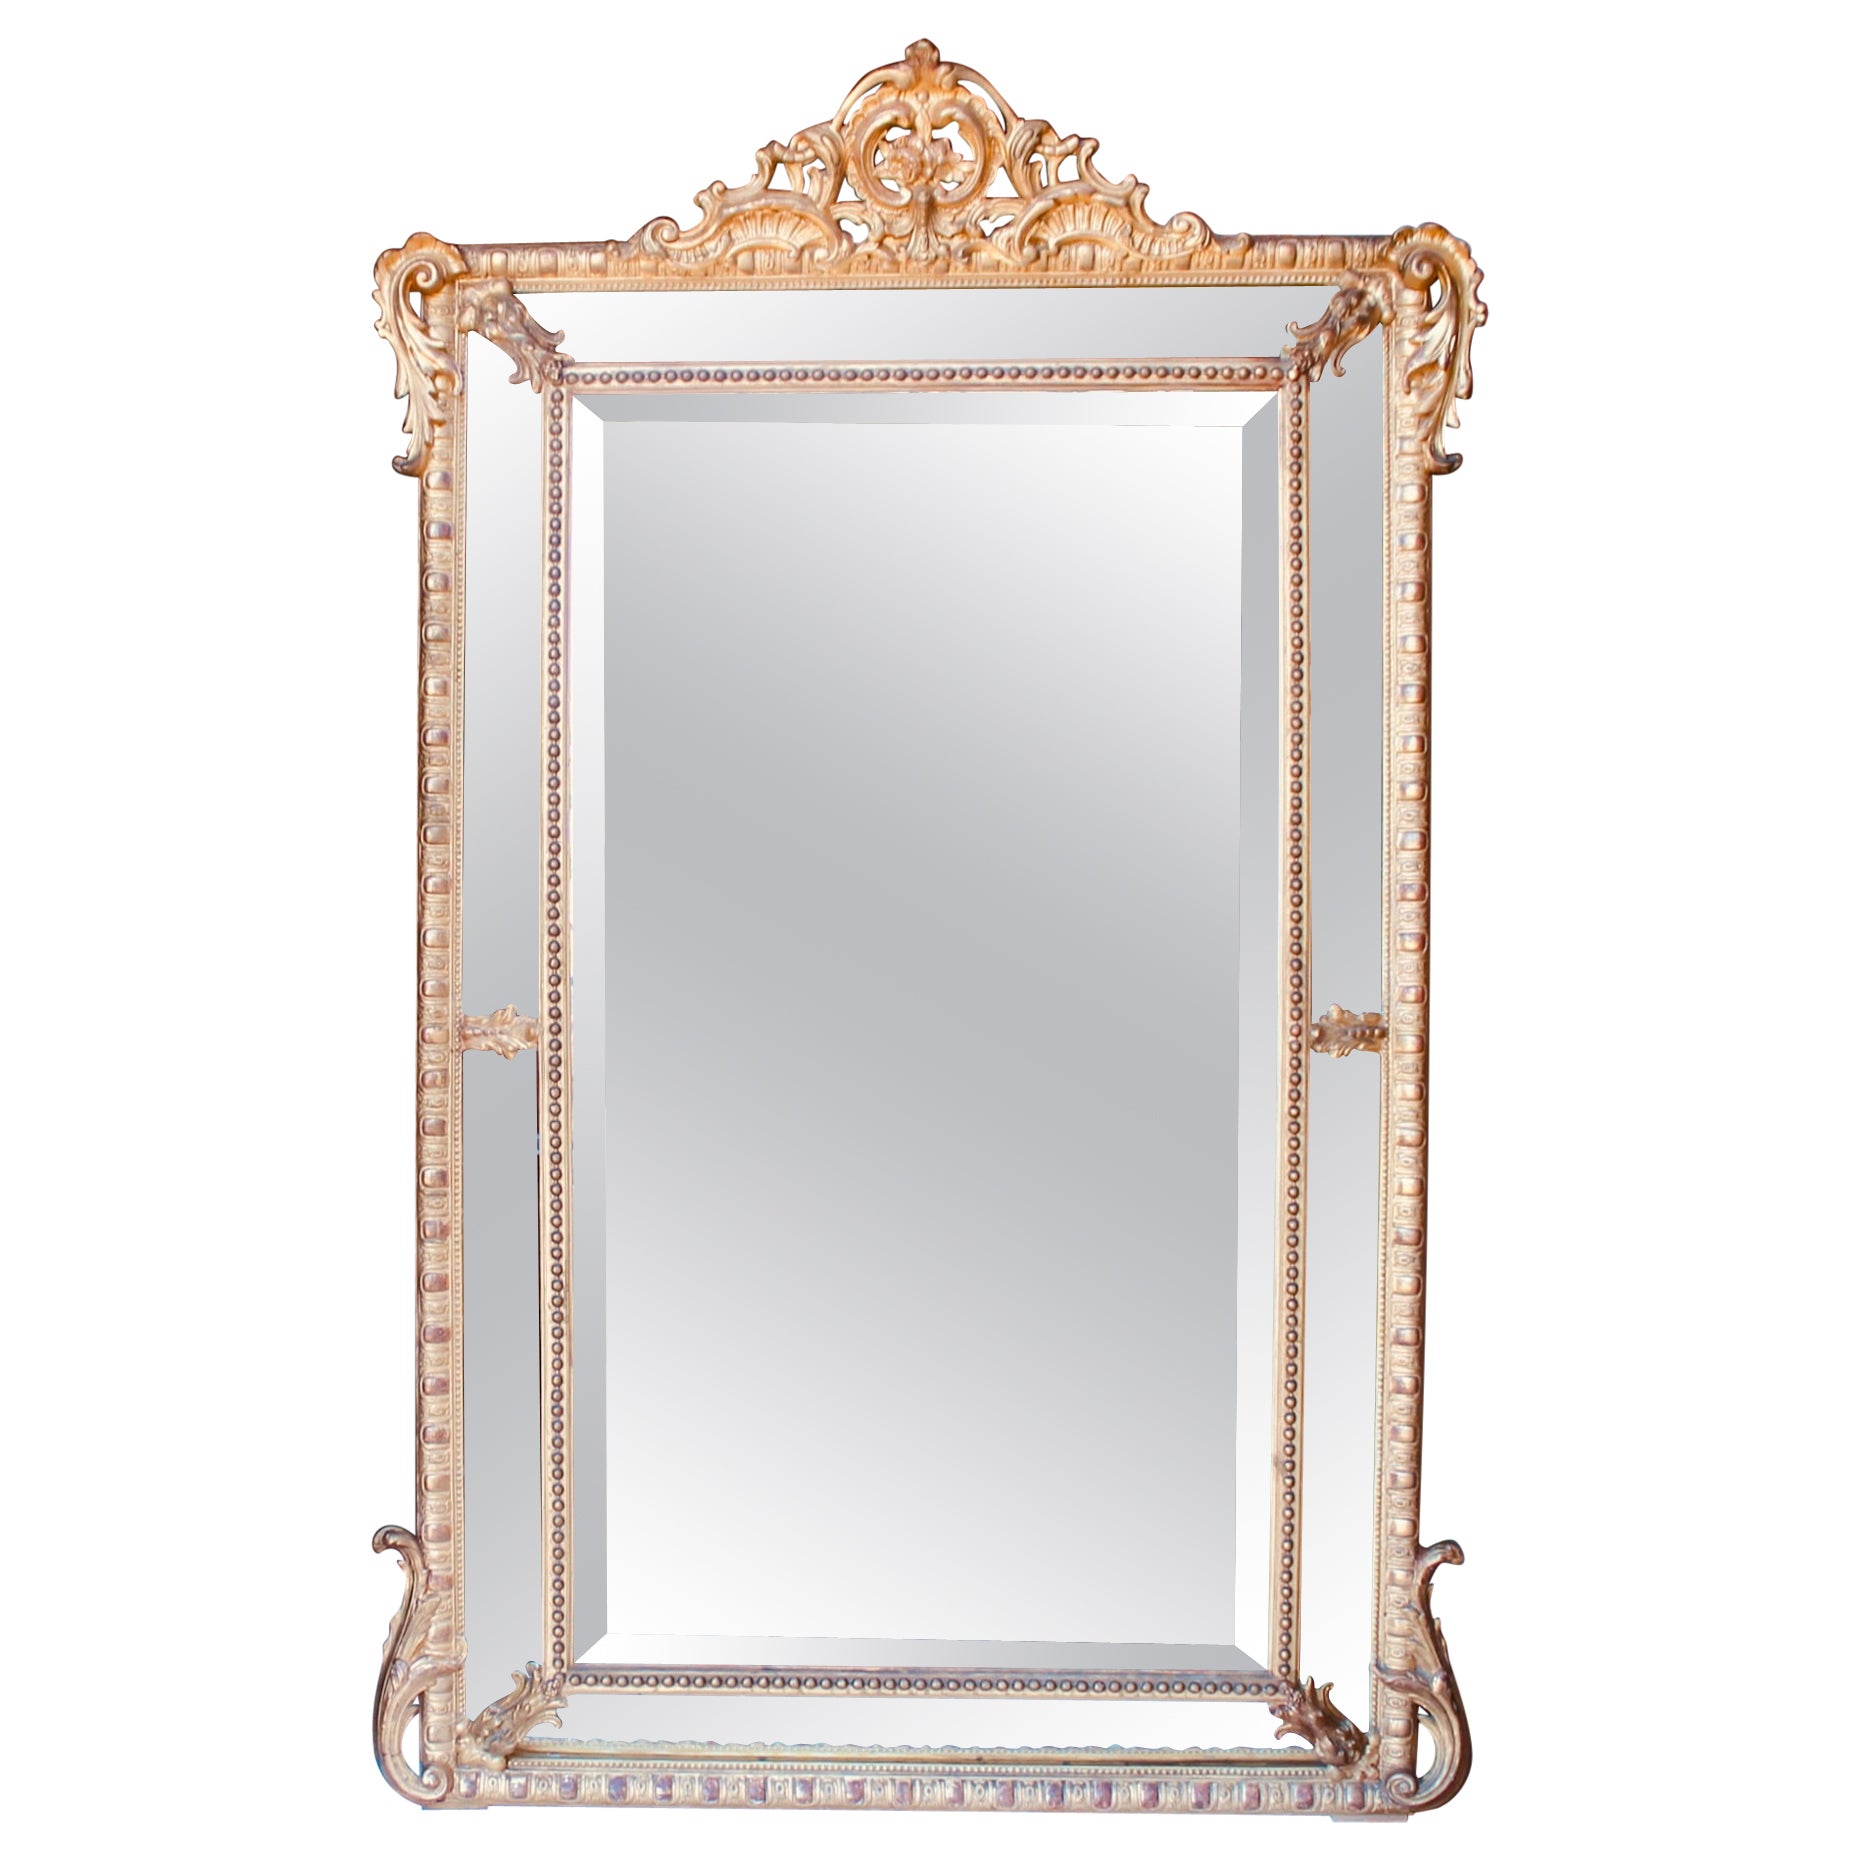 Large French Gilt Borderglass Pier Mirror with Rococo Crest, 19th Century For Sale